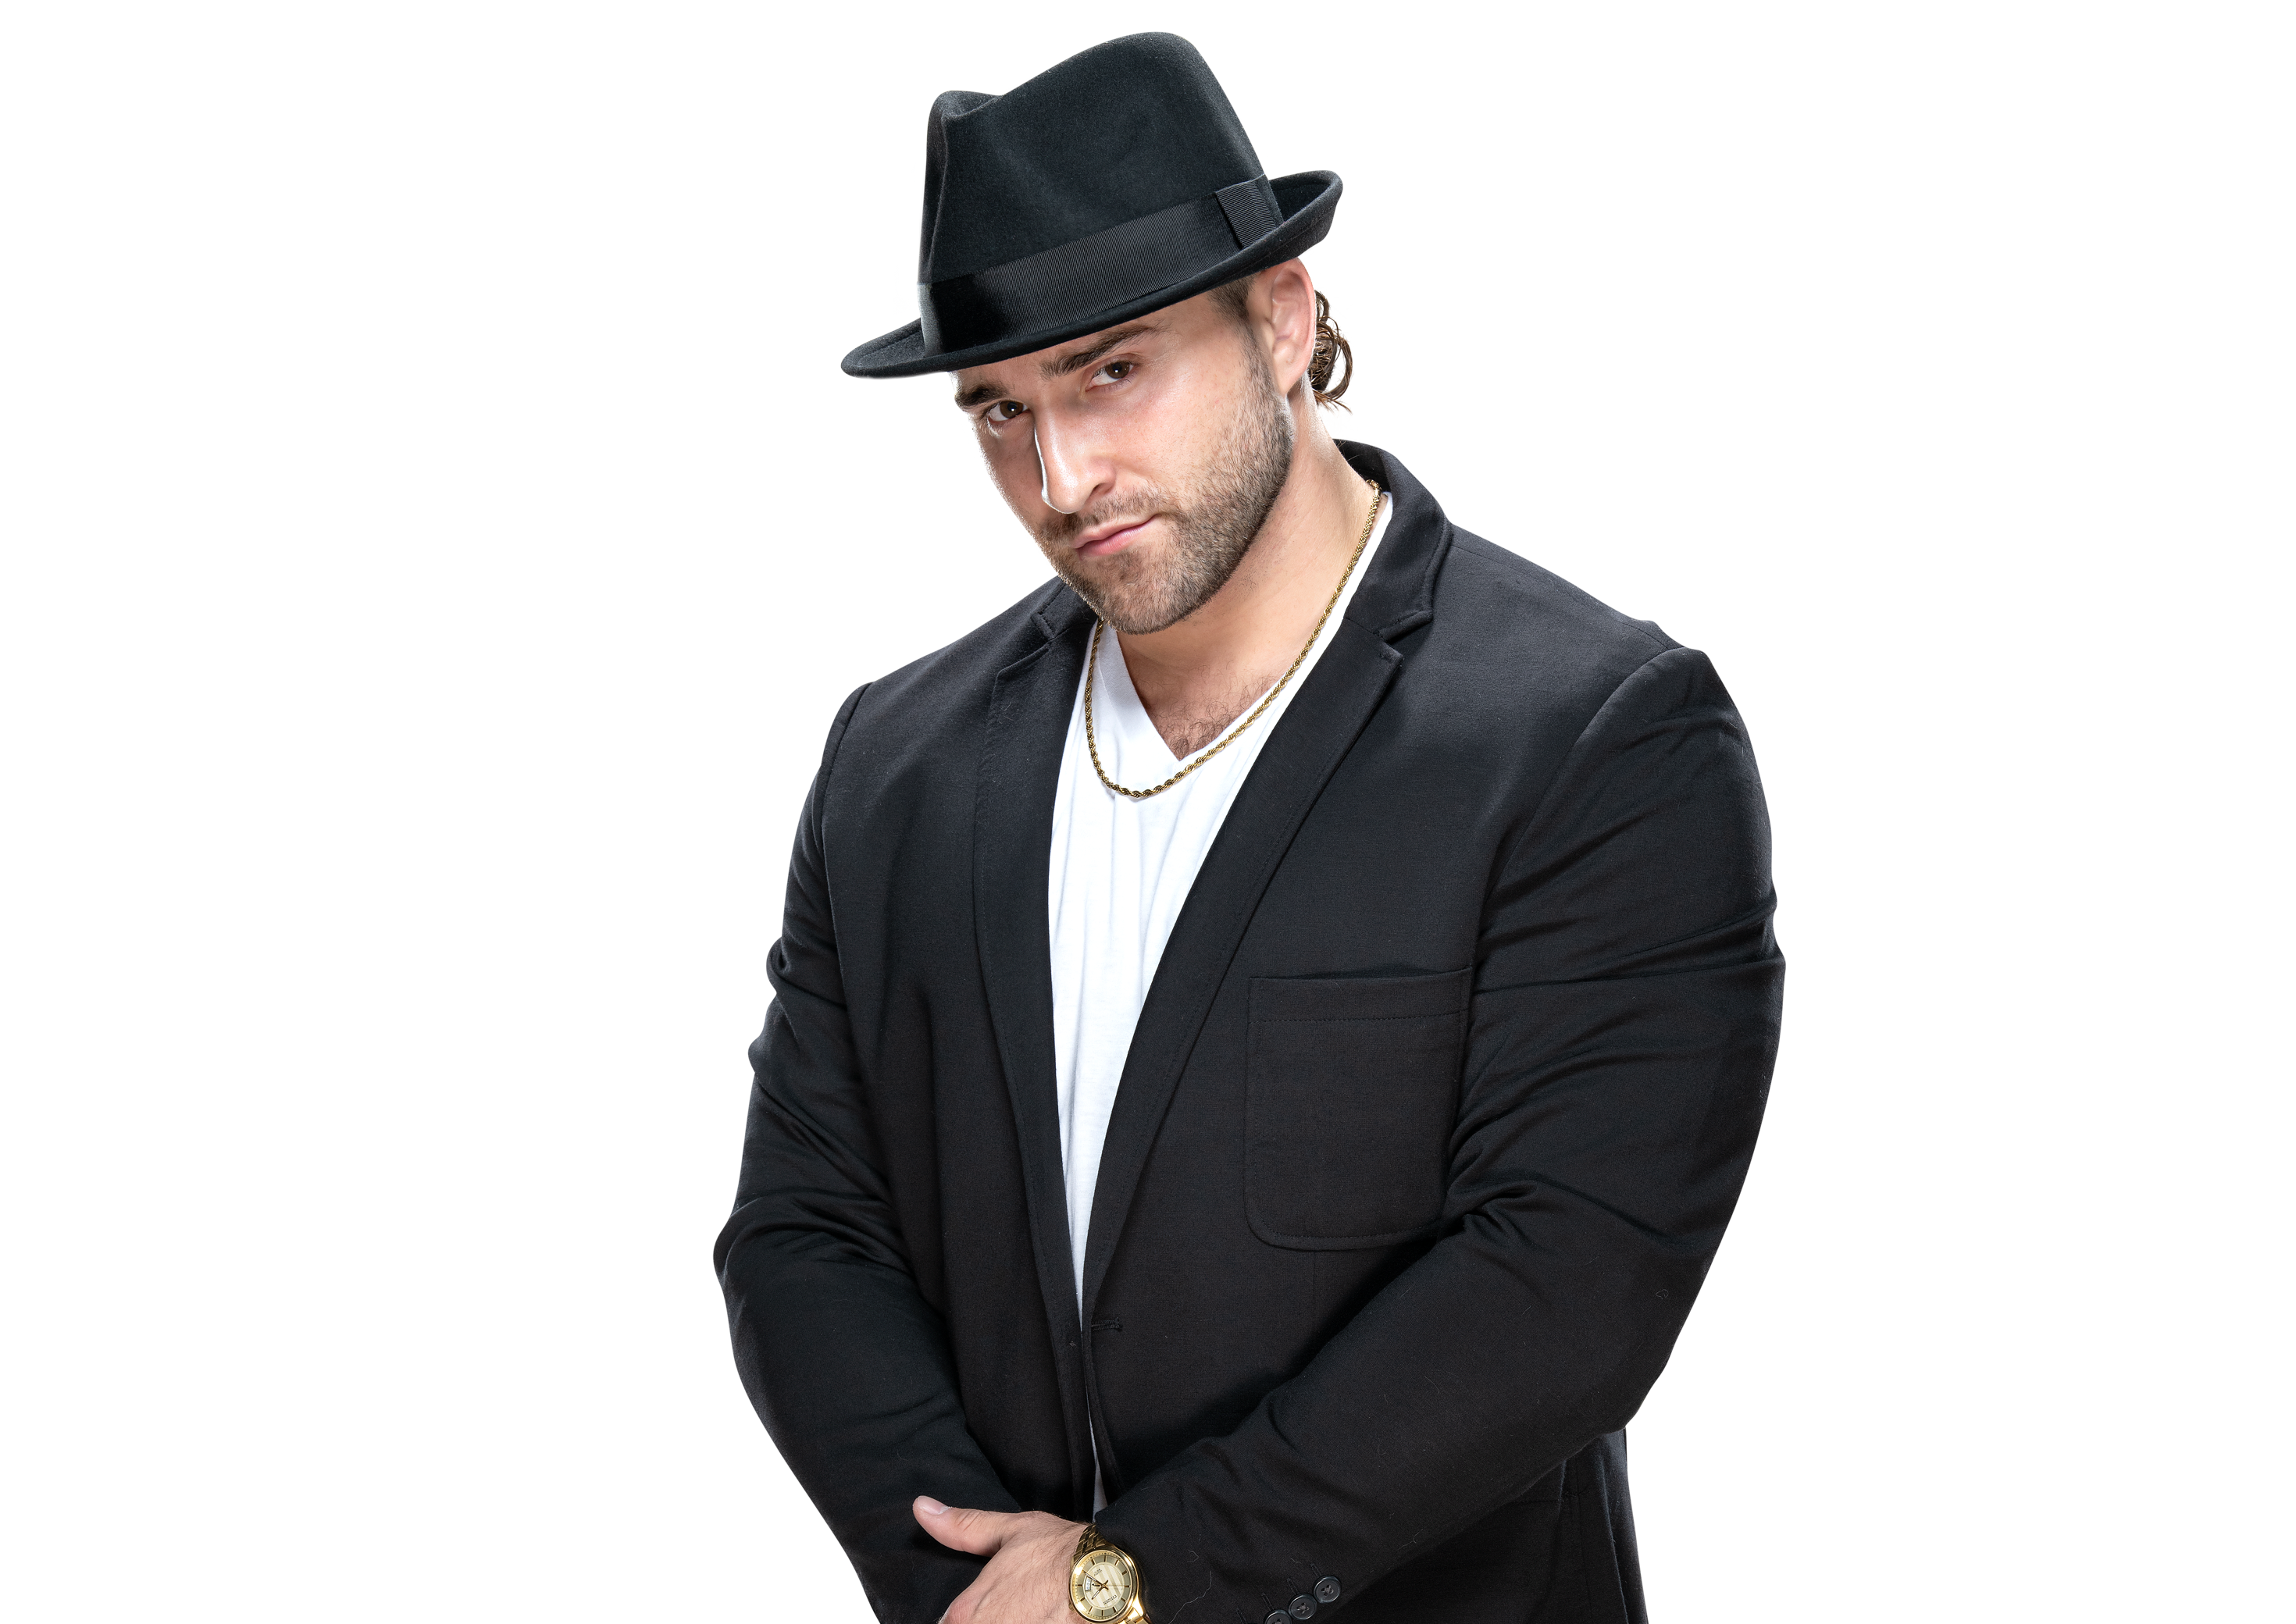 Tony D'Angelo isn't seasoned enough for NXT championship gold